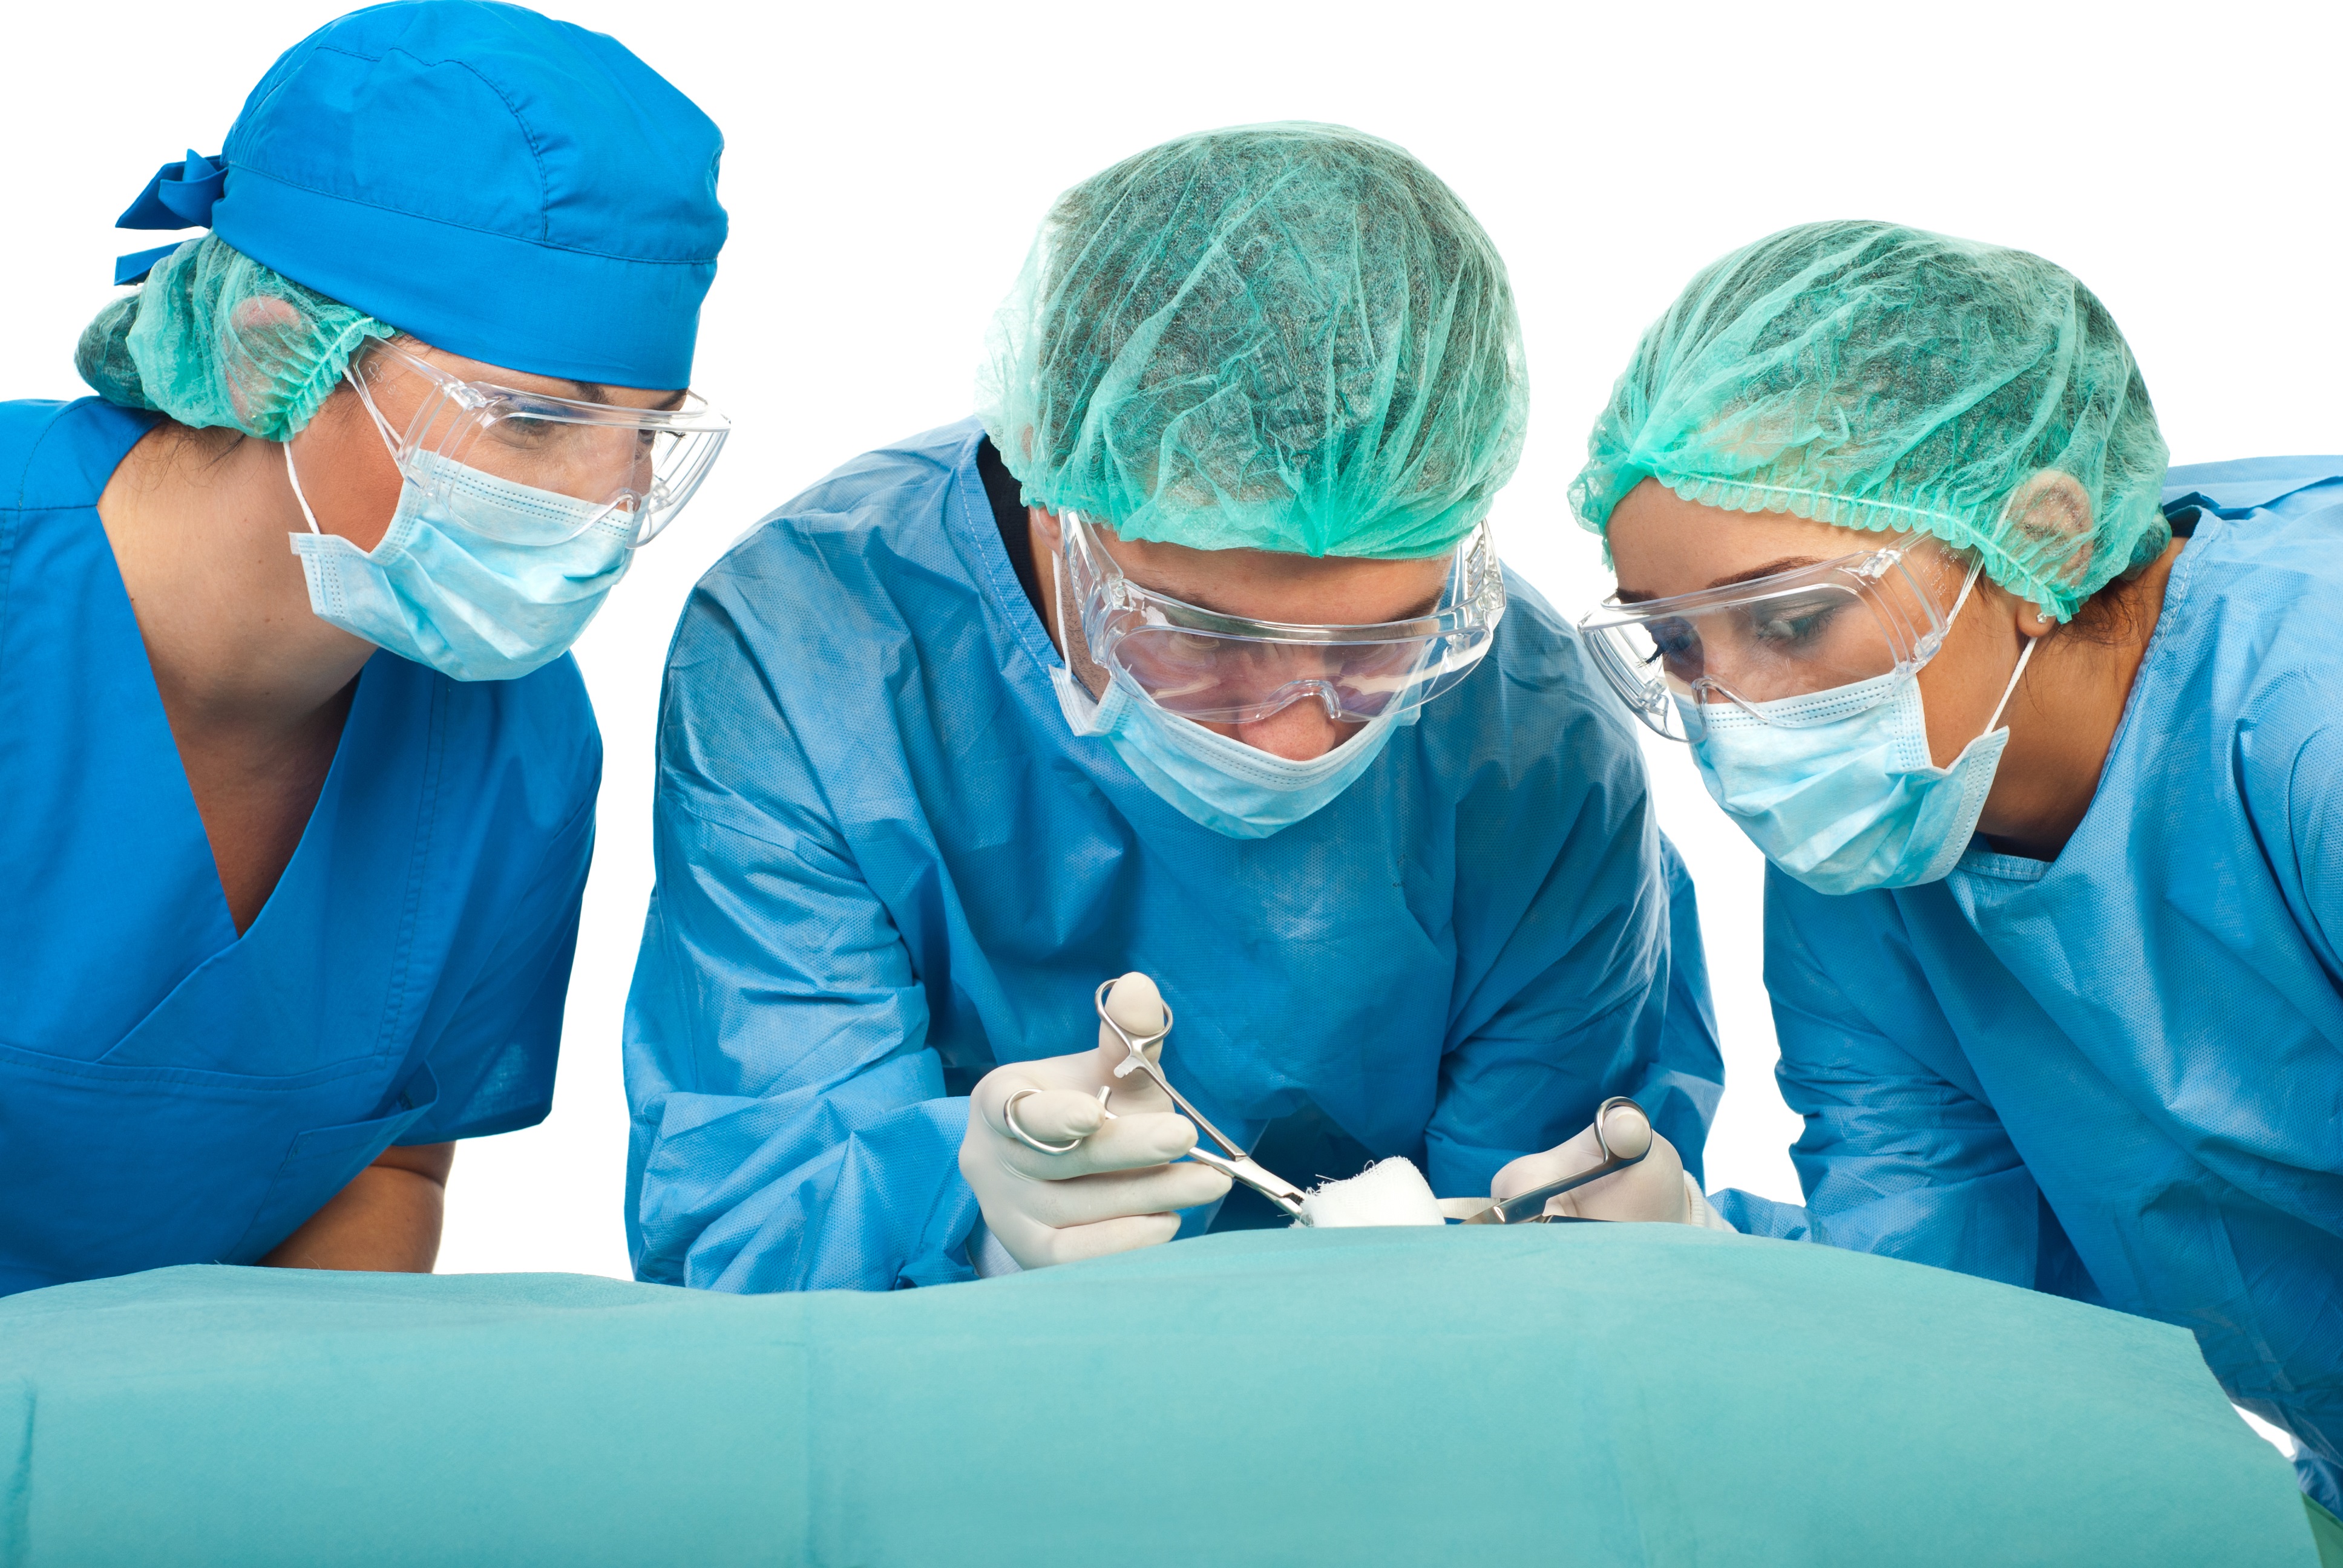 three surgeons doing a surgery wearing blue gowns and head